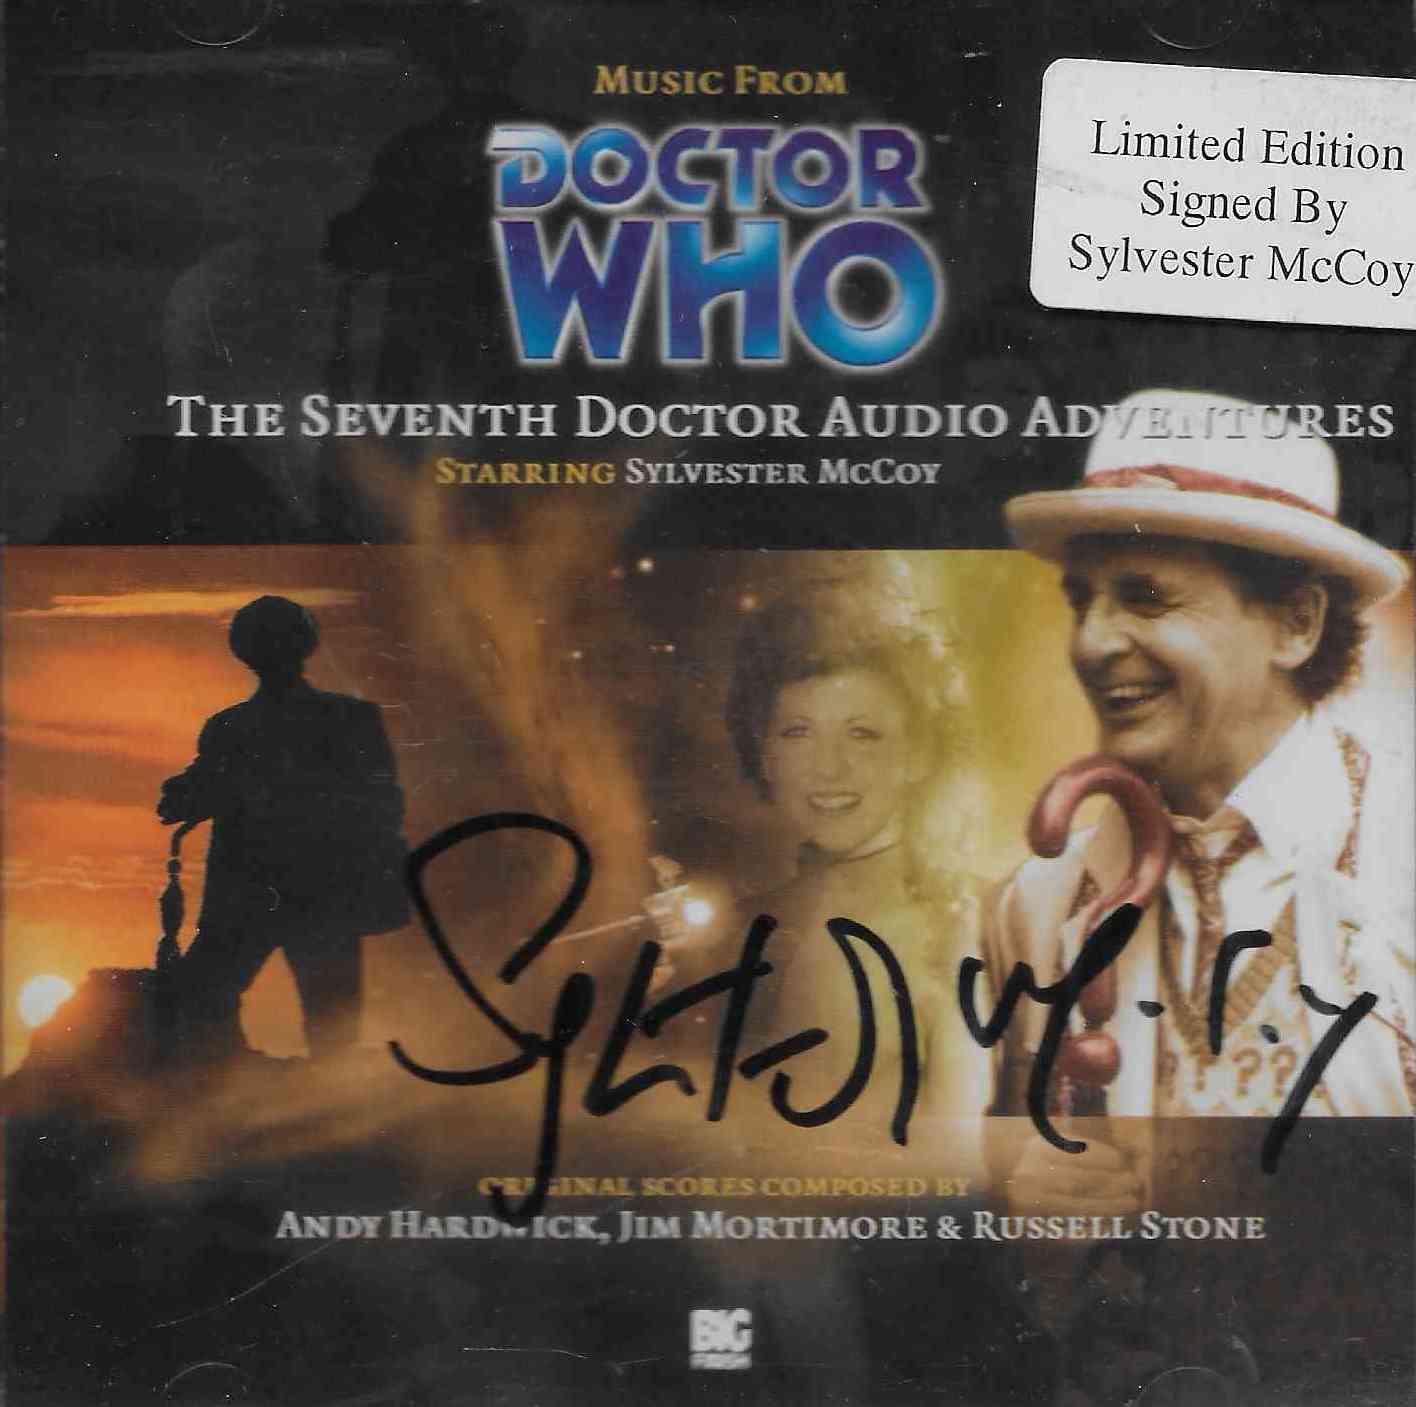 Picture of Doctor Who - The seventh Doctor audio adventures by artist Andy Hardwick / Jim Mortimore / Russell Stone from the BBC cds - Records and Tapes library